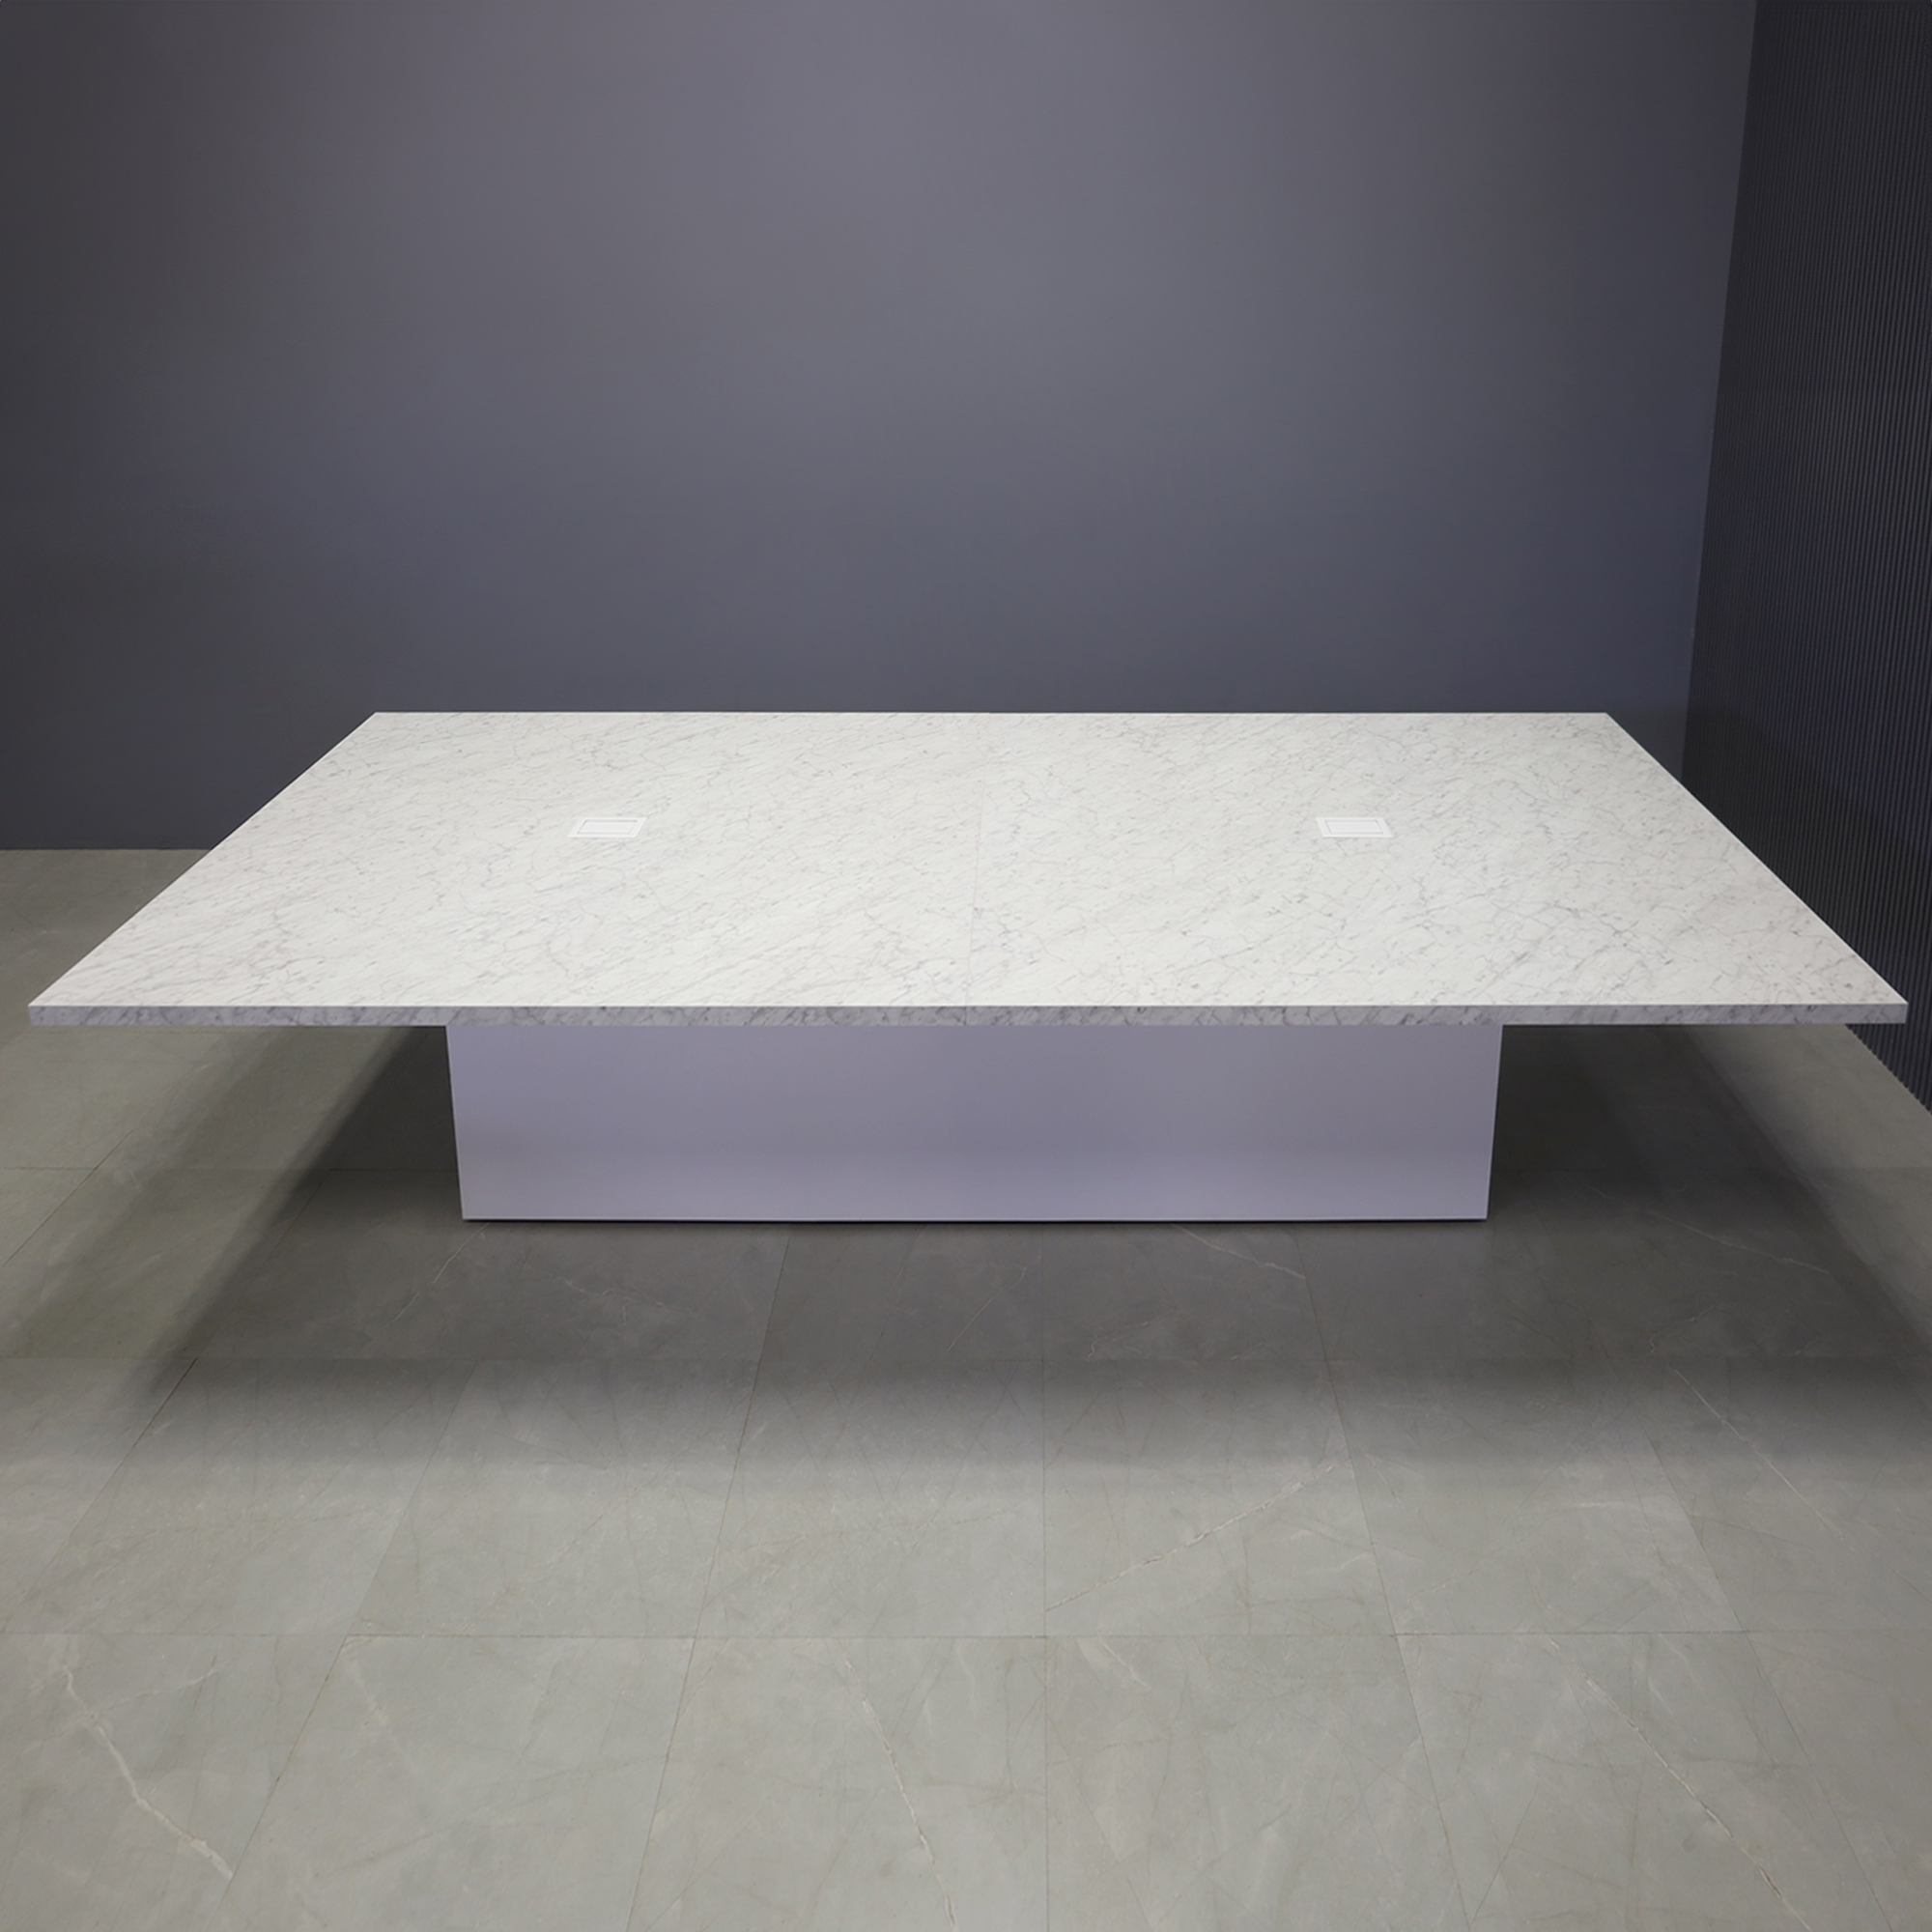 144-inch Newton Rectangular Conference Table in carrara laminate top, with two white MX2 powerboxes, and white matte laminate column base, shown here.